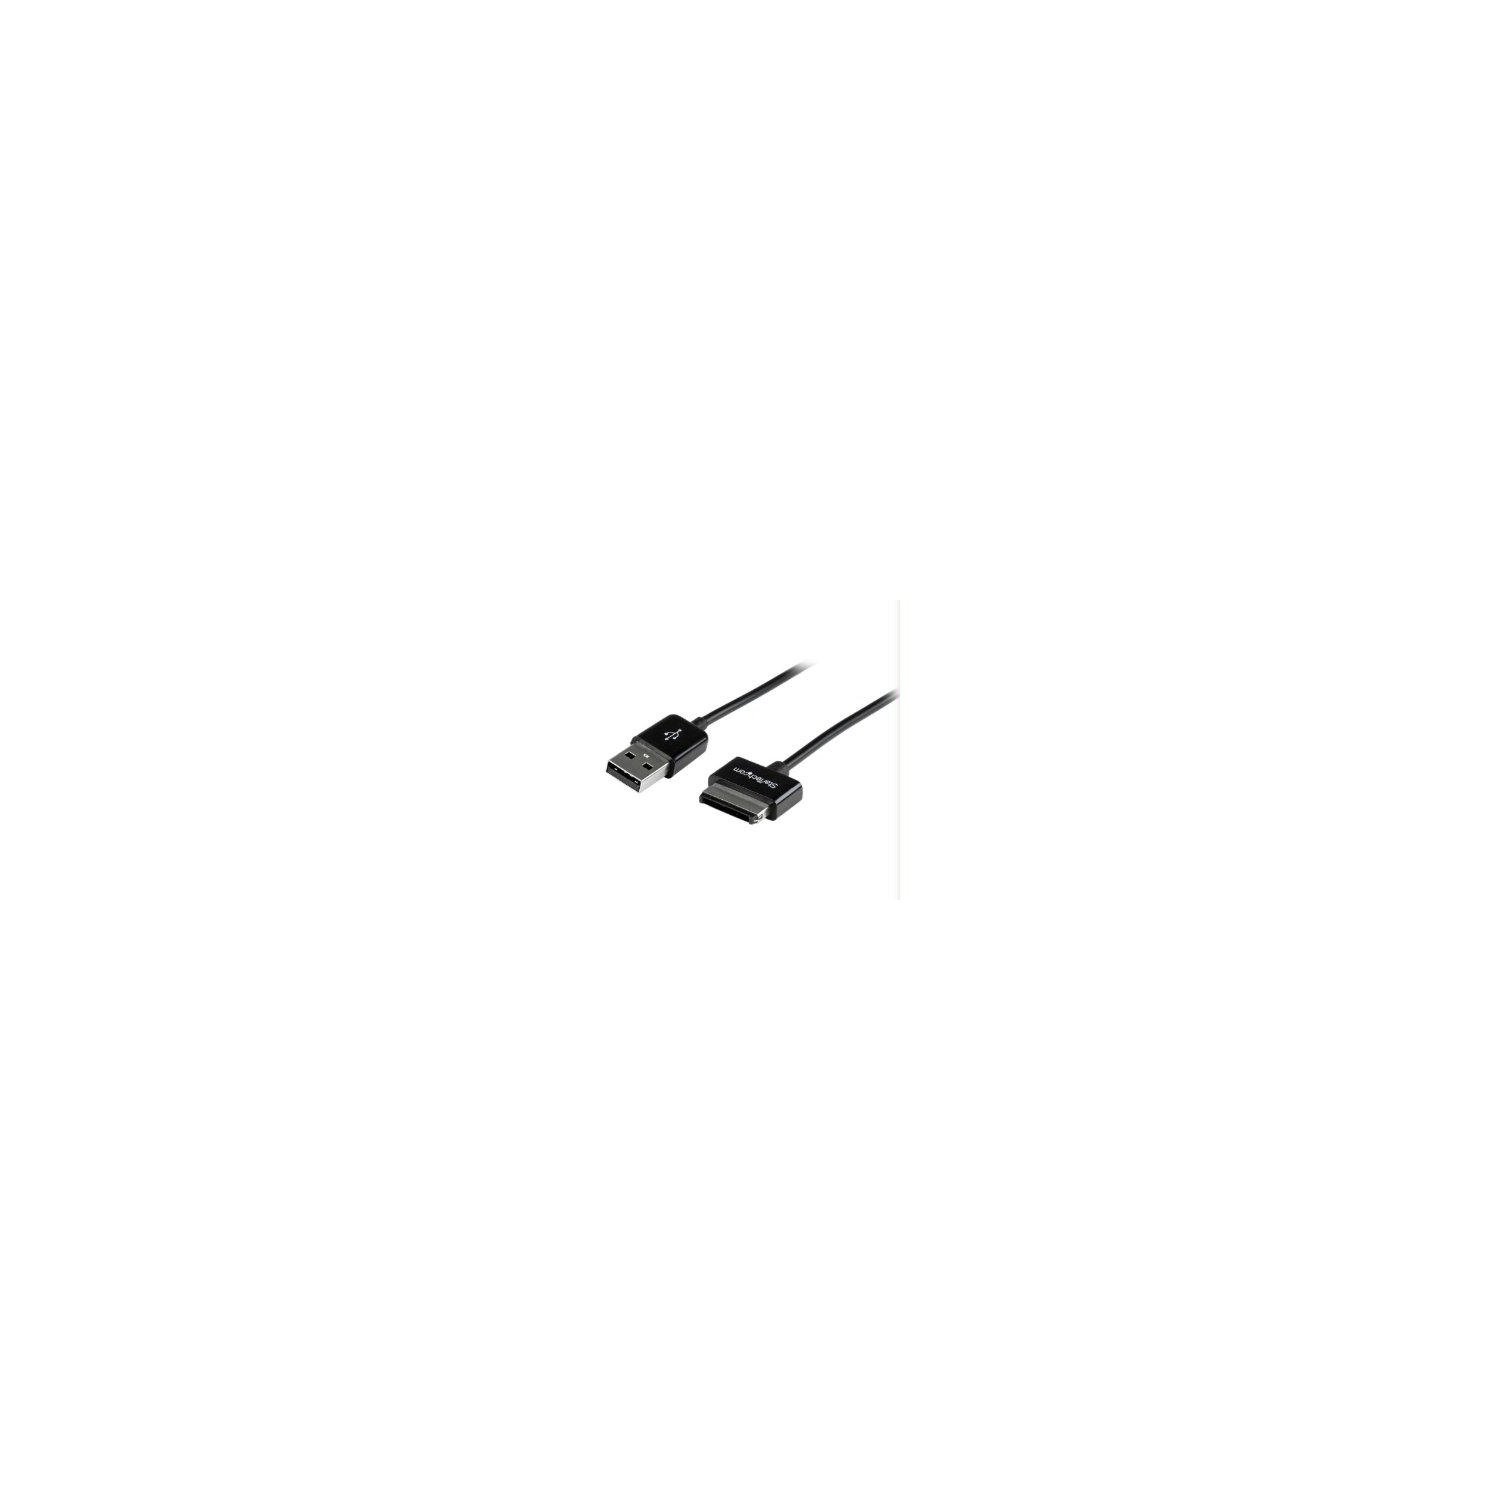 StarTech 3m Dock Connector to USB Cable for ASUS Transformer Pad and Eee Pad Transformer / Slider